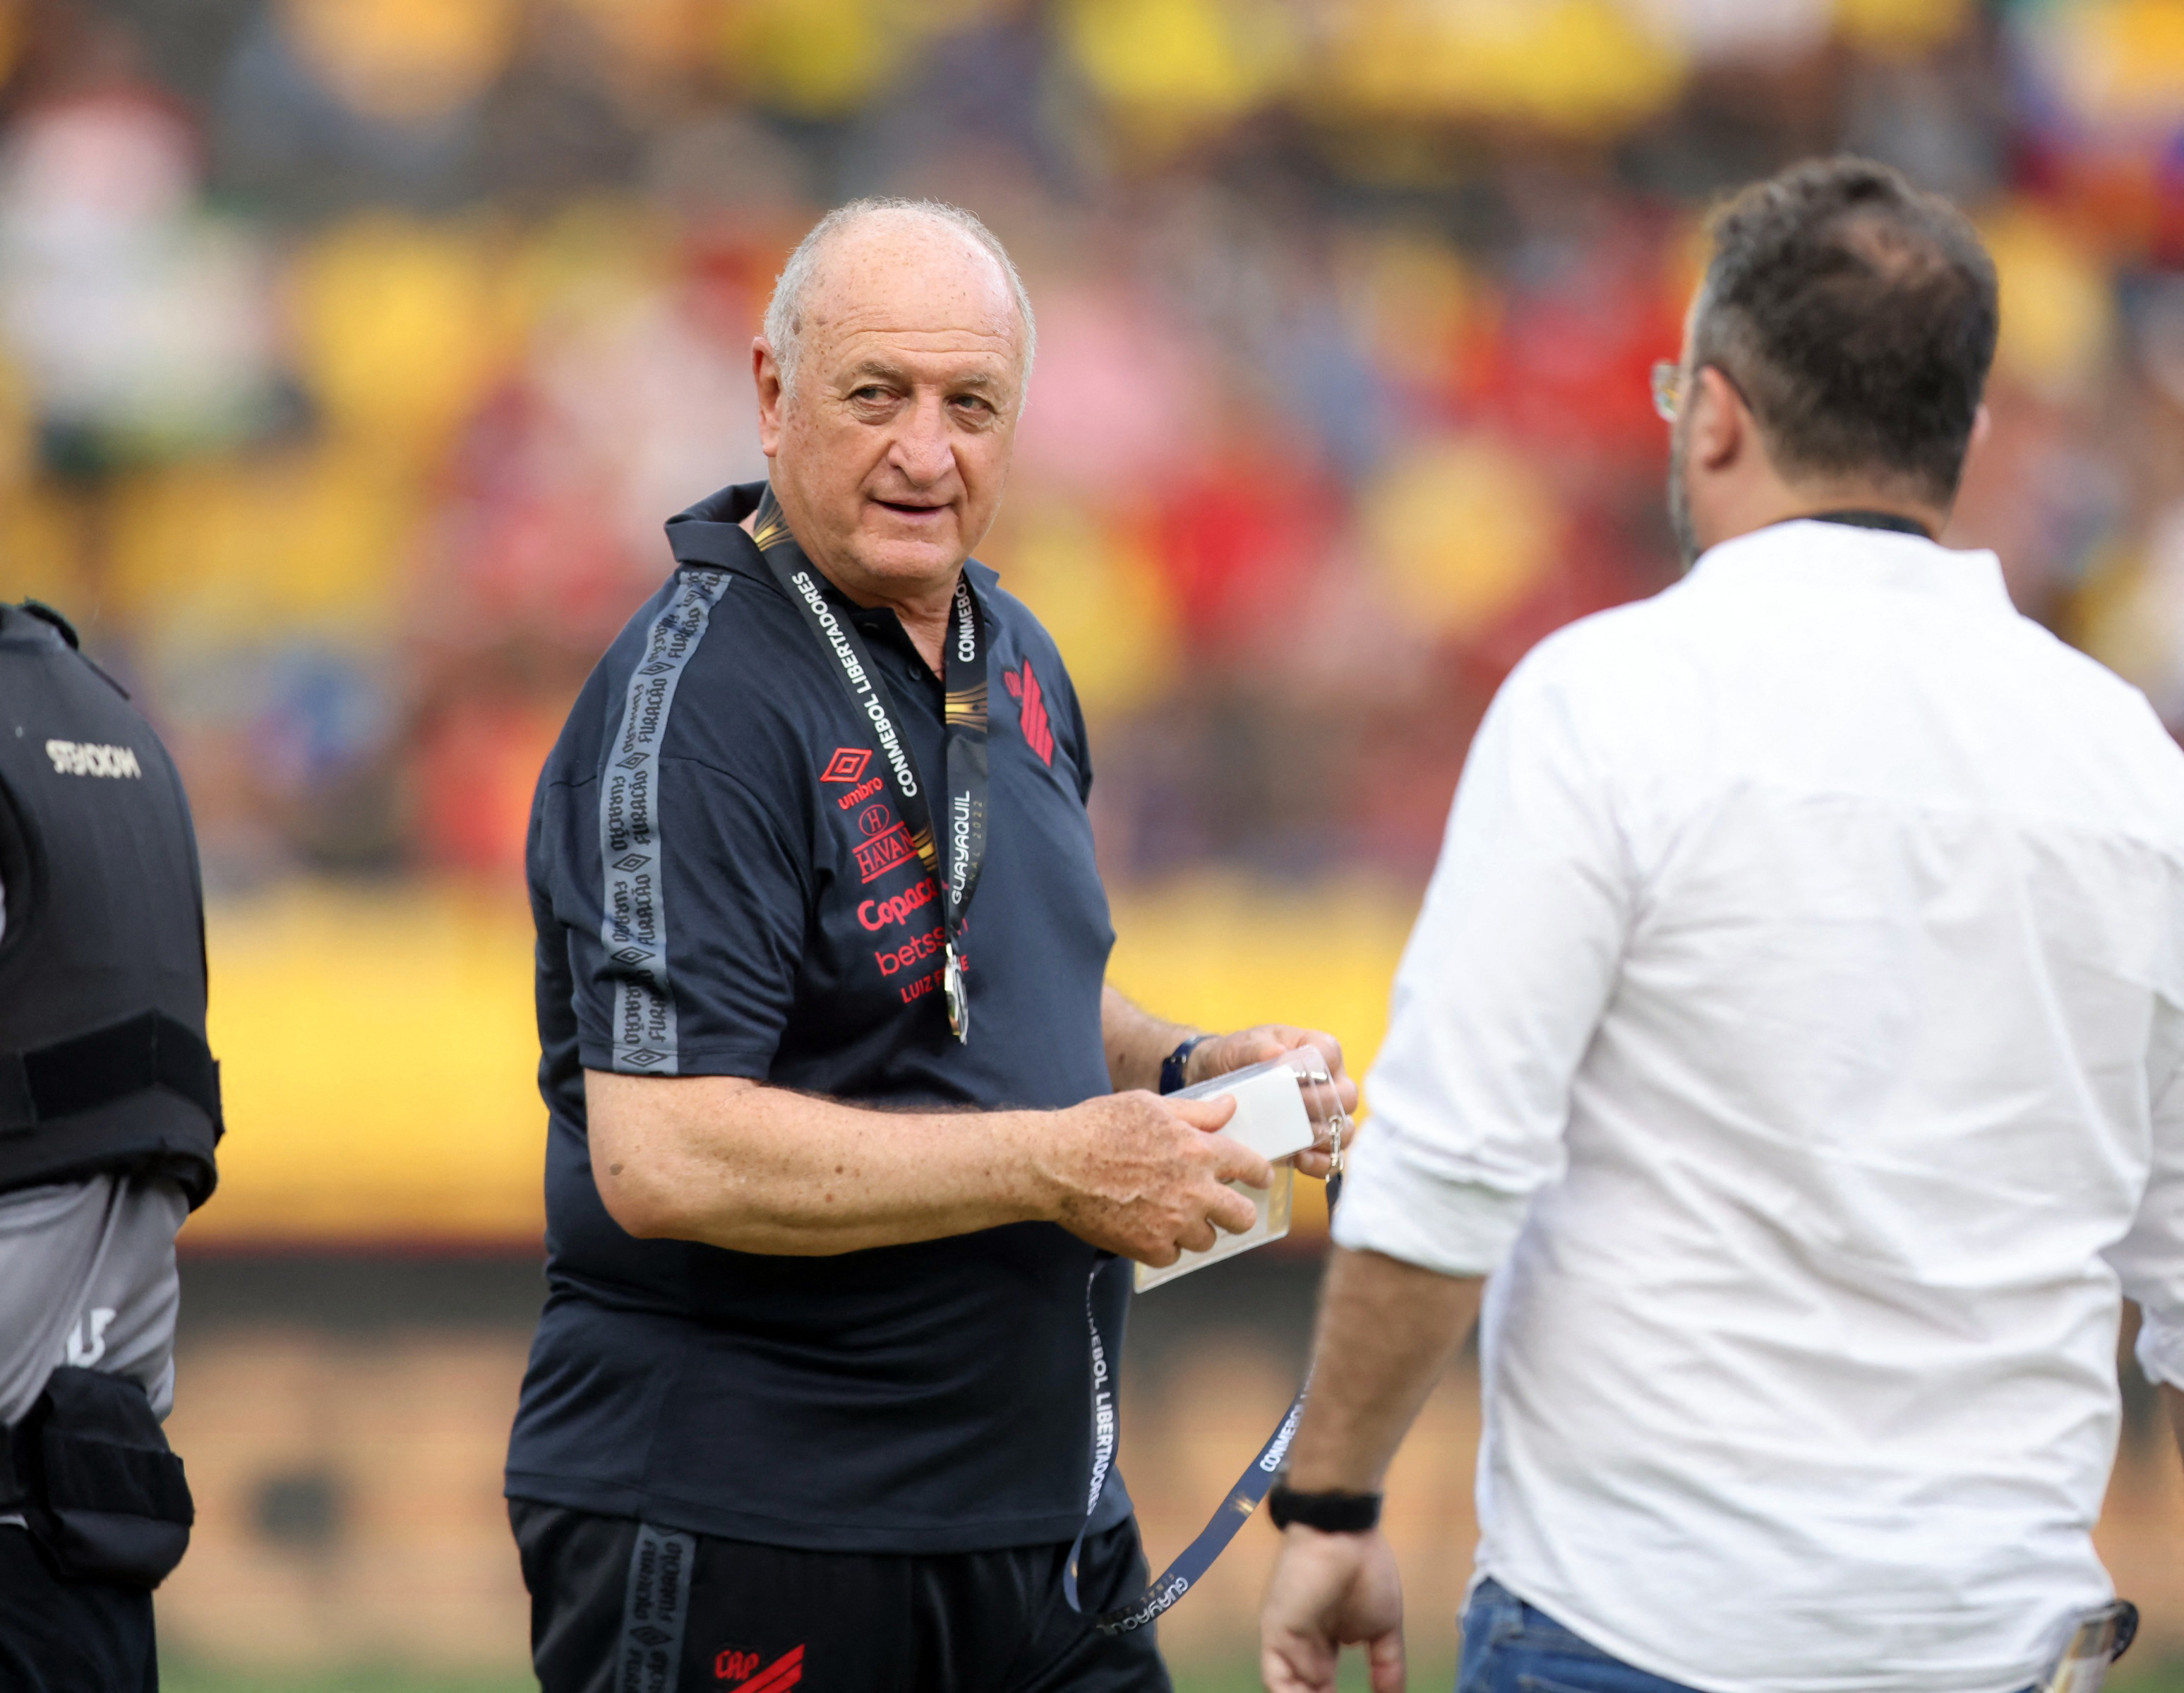 Scolari comes out of retirement to coach Atletico Mineiro | Reuters